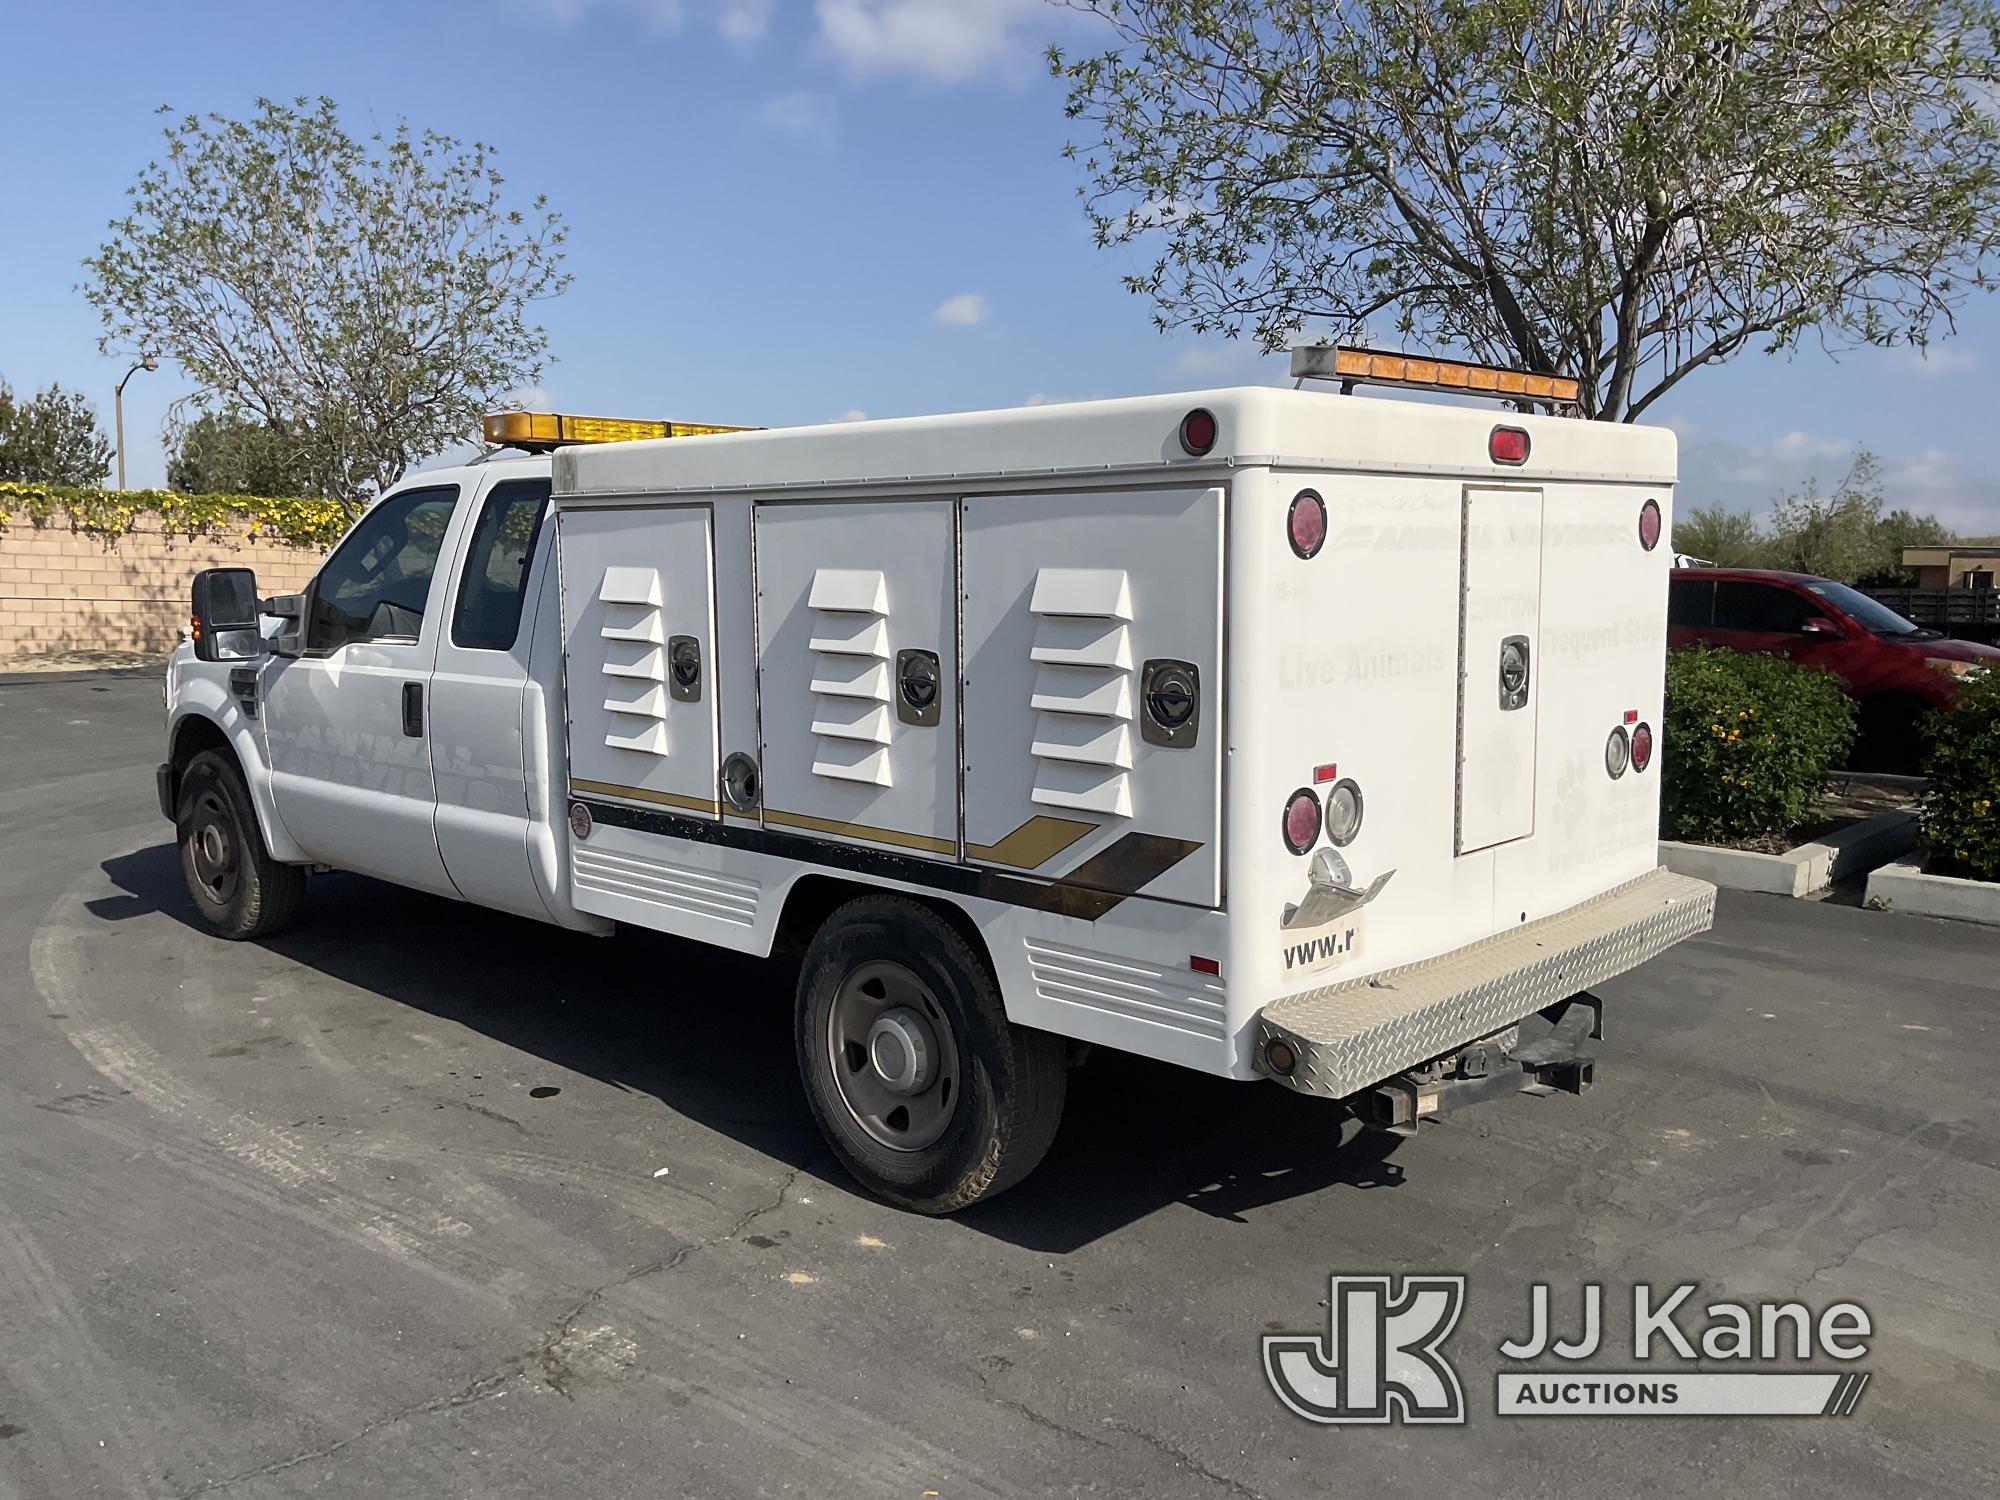 (Jurupa Valley, CA) 2008 Ford F250 XL Cab & Chassis Runs & Moves, Not Clearing Drive Cycle